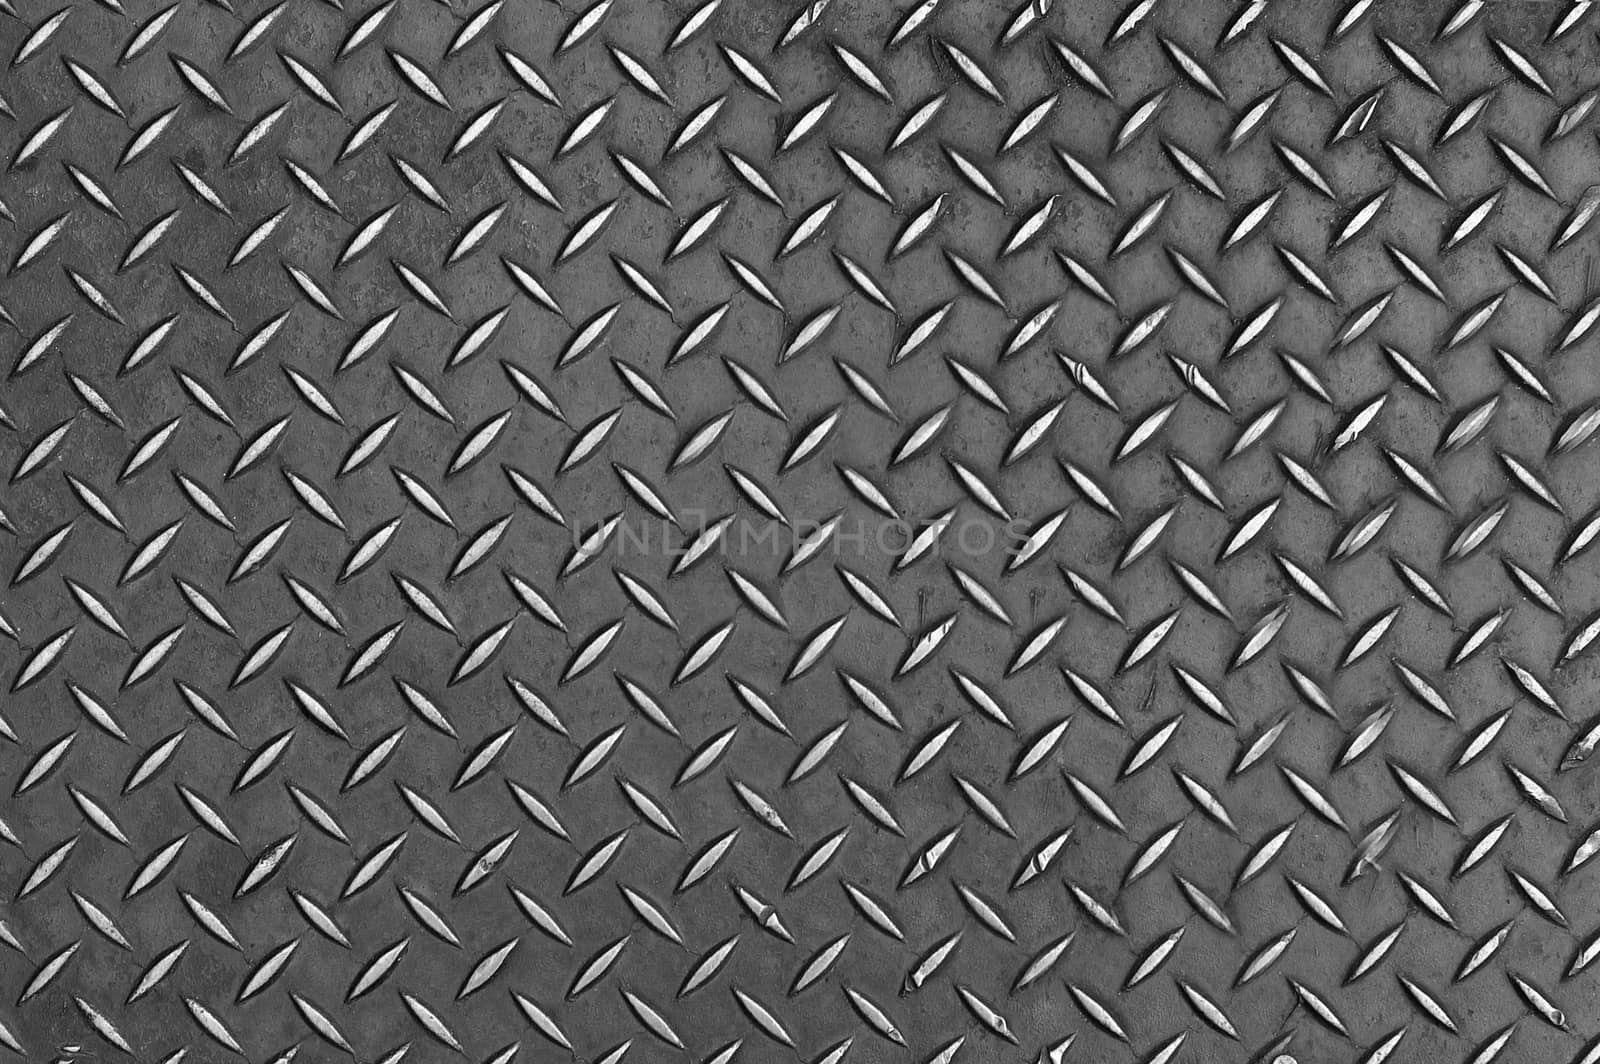 Metal surface with a repeating texture pattern. Texture or background